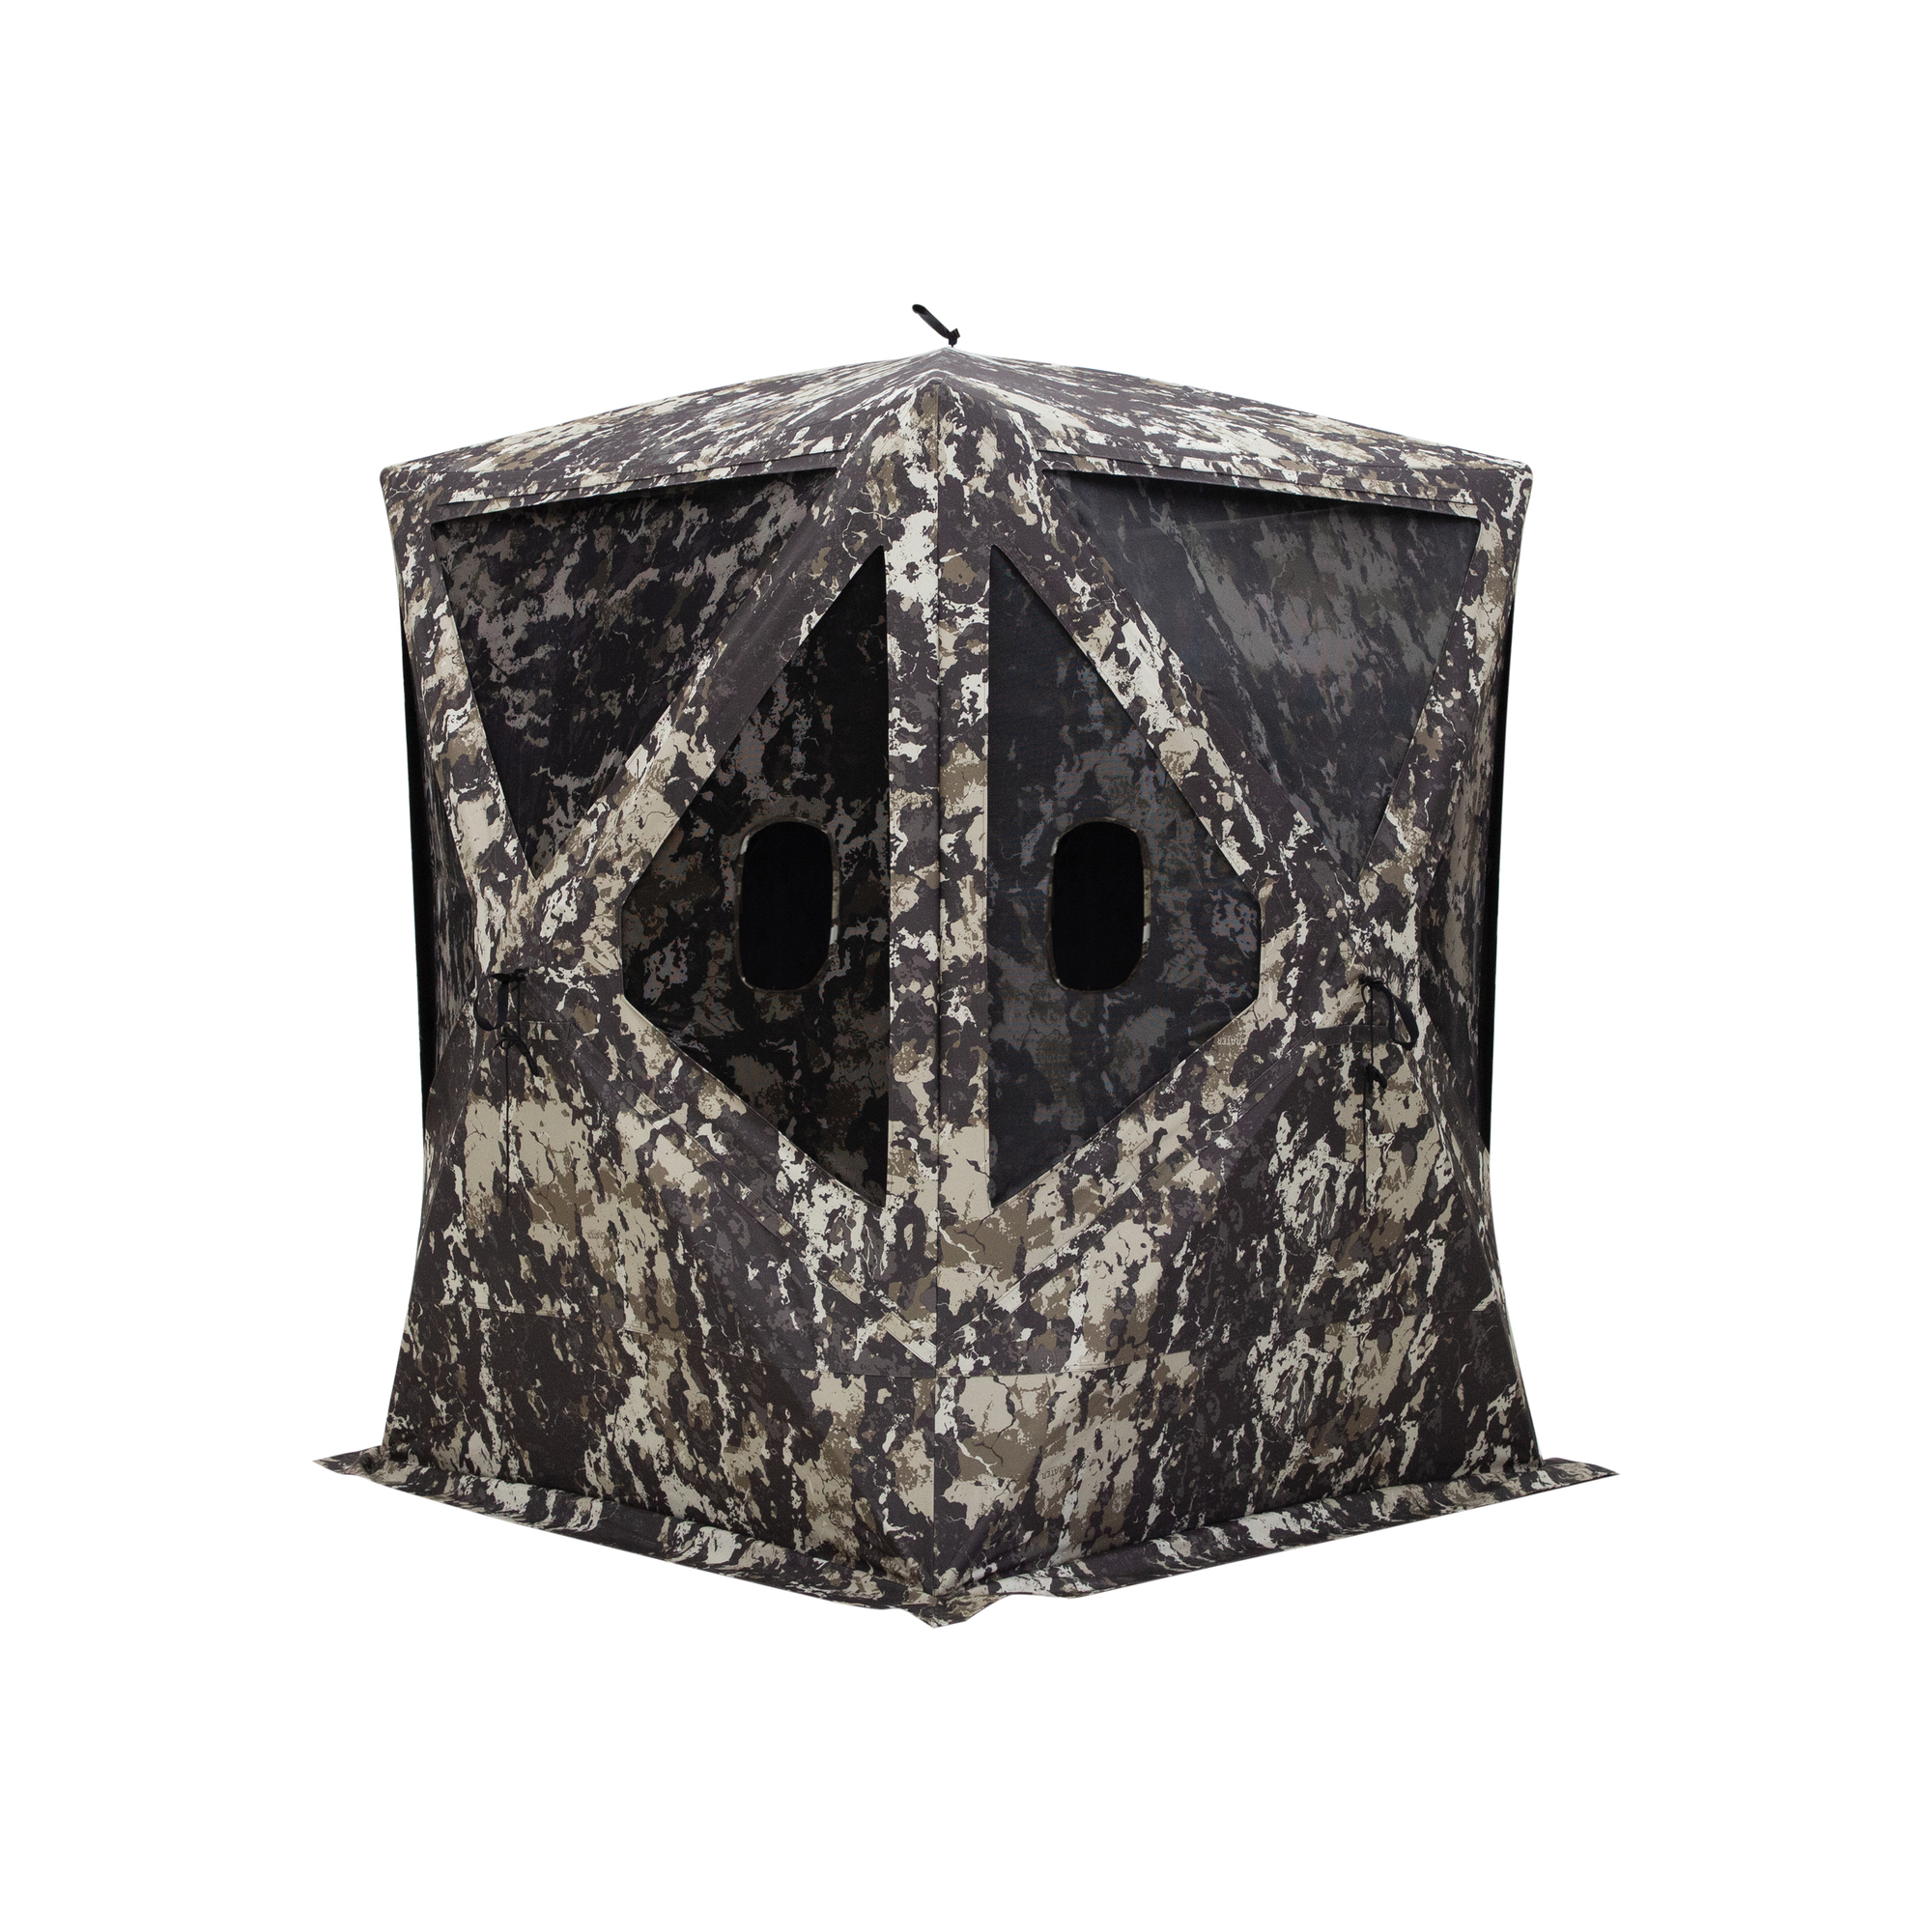 Barronett Blinds, Big Mike Heavy-Duty Hub Blind, 2-Person Capacity, Color Camouflage, Material Polyester, Model BMHD300CC